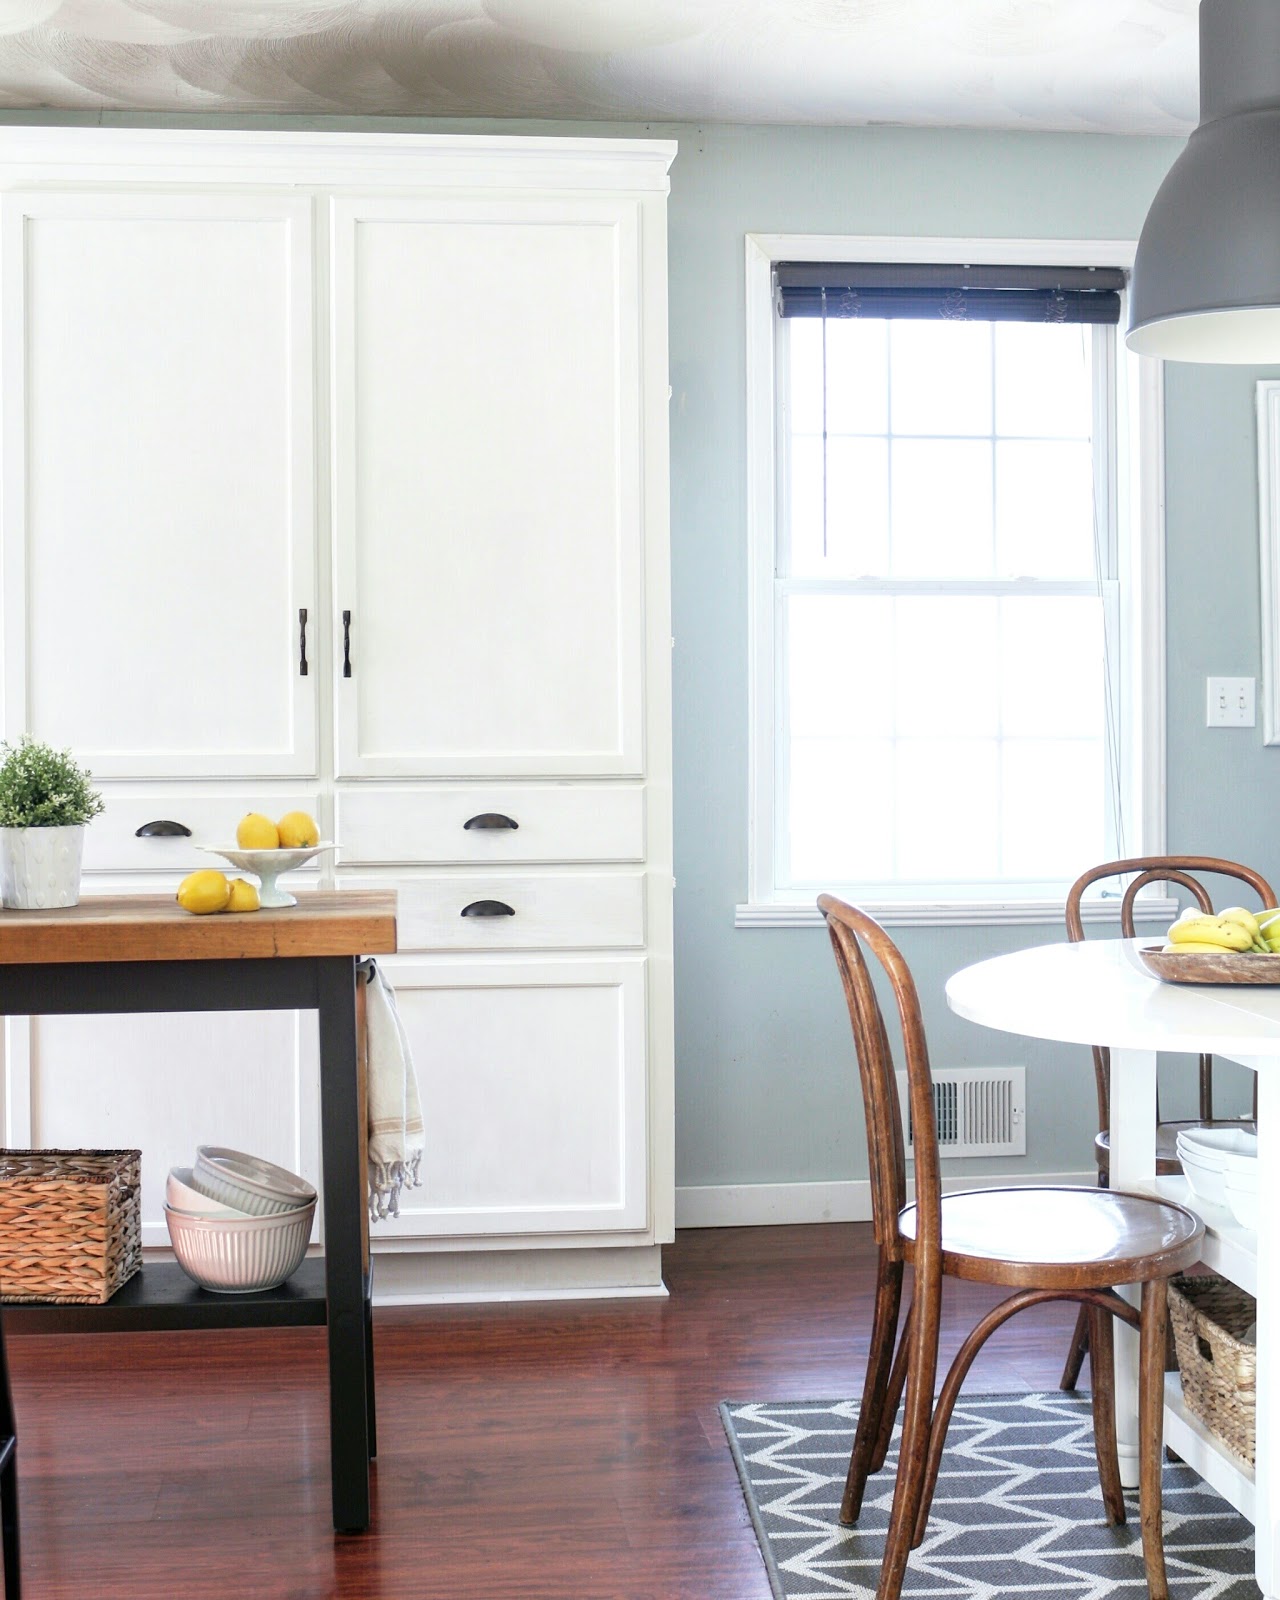 My Diy Kitchen Cabinet Crown Molding How To Fake The Look Without The Fuss Made By Carli